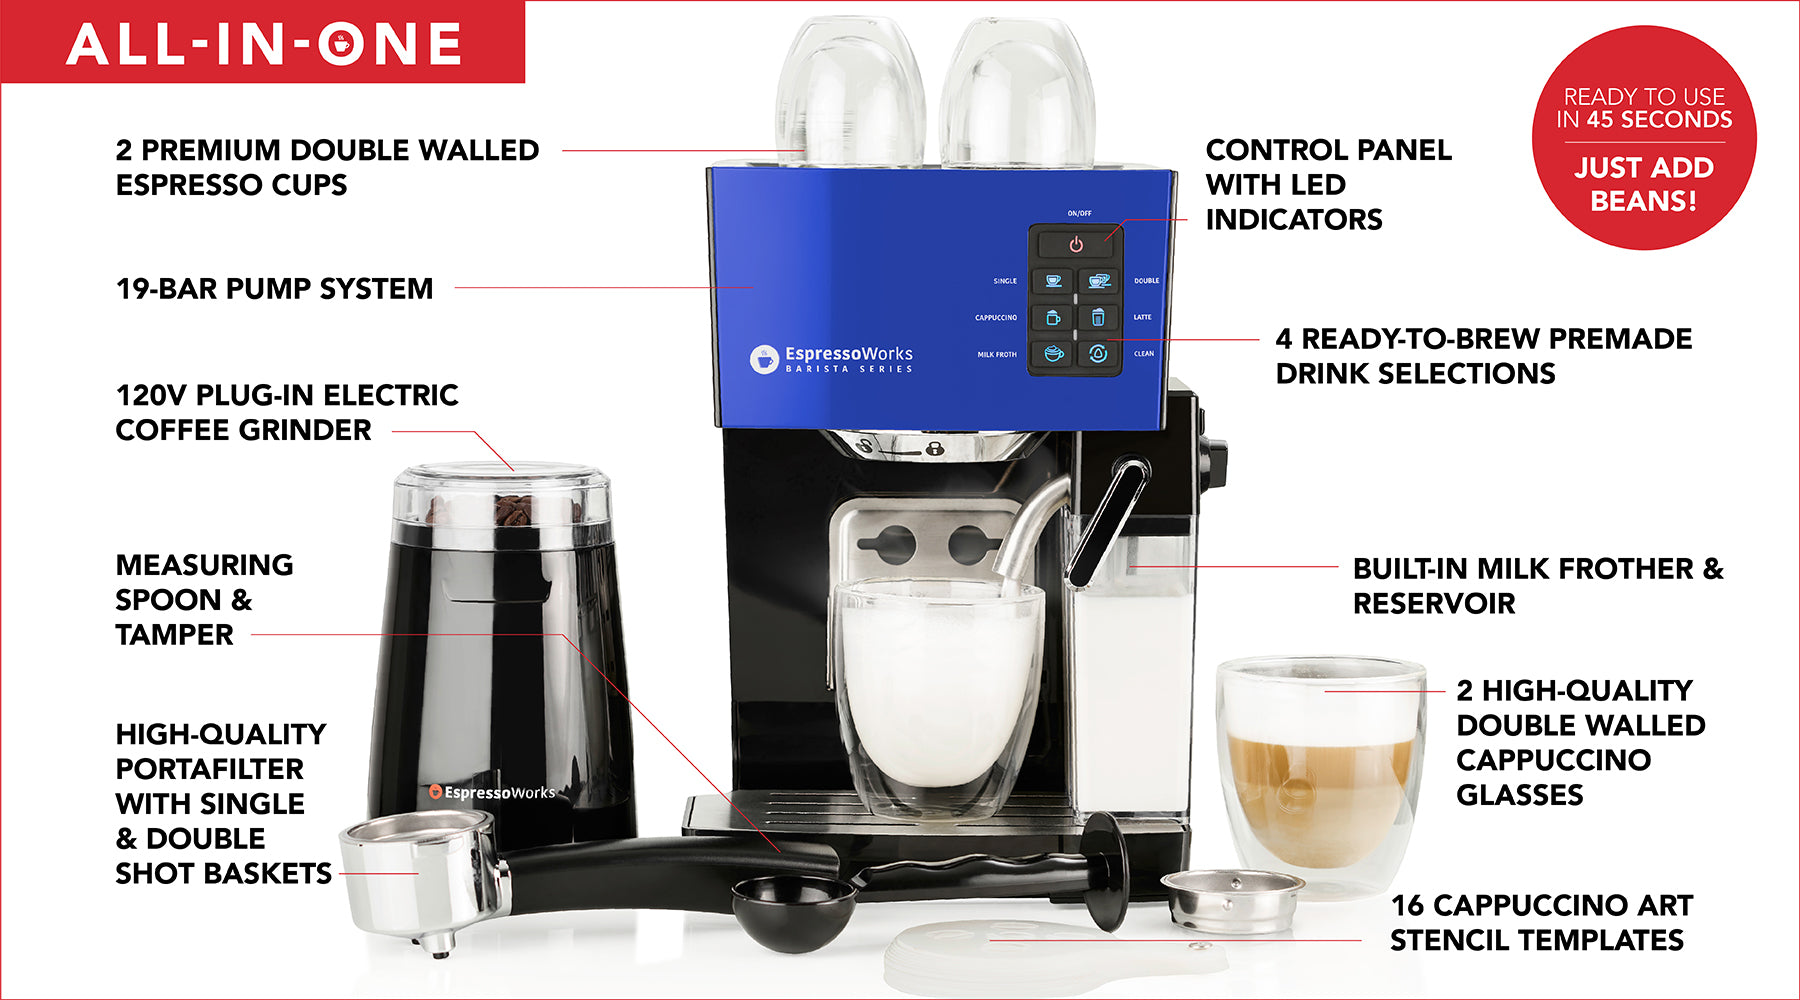 Everything included when you purchase the EspressoWorks 19-bar Espresso & Cappuccino Machine